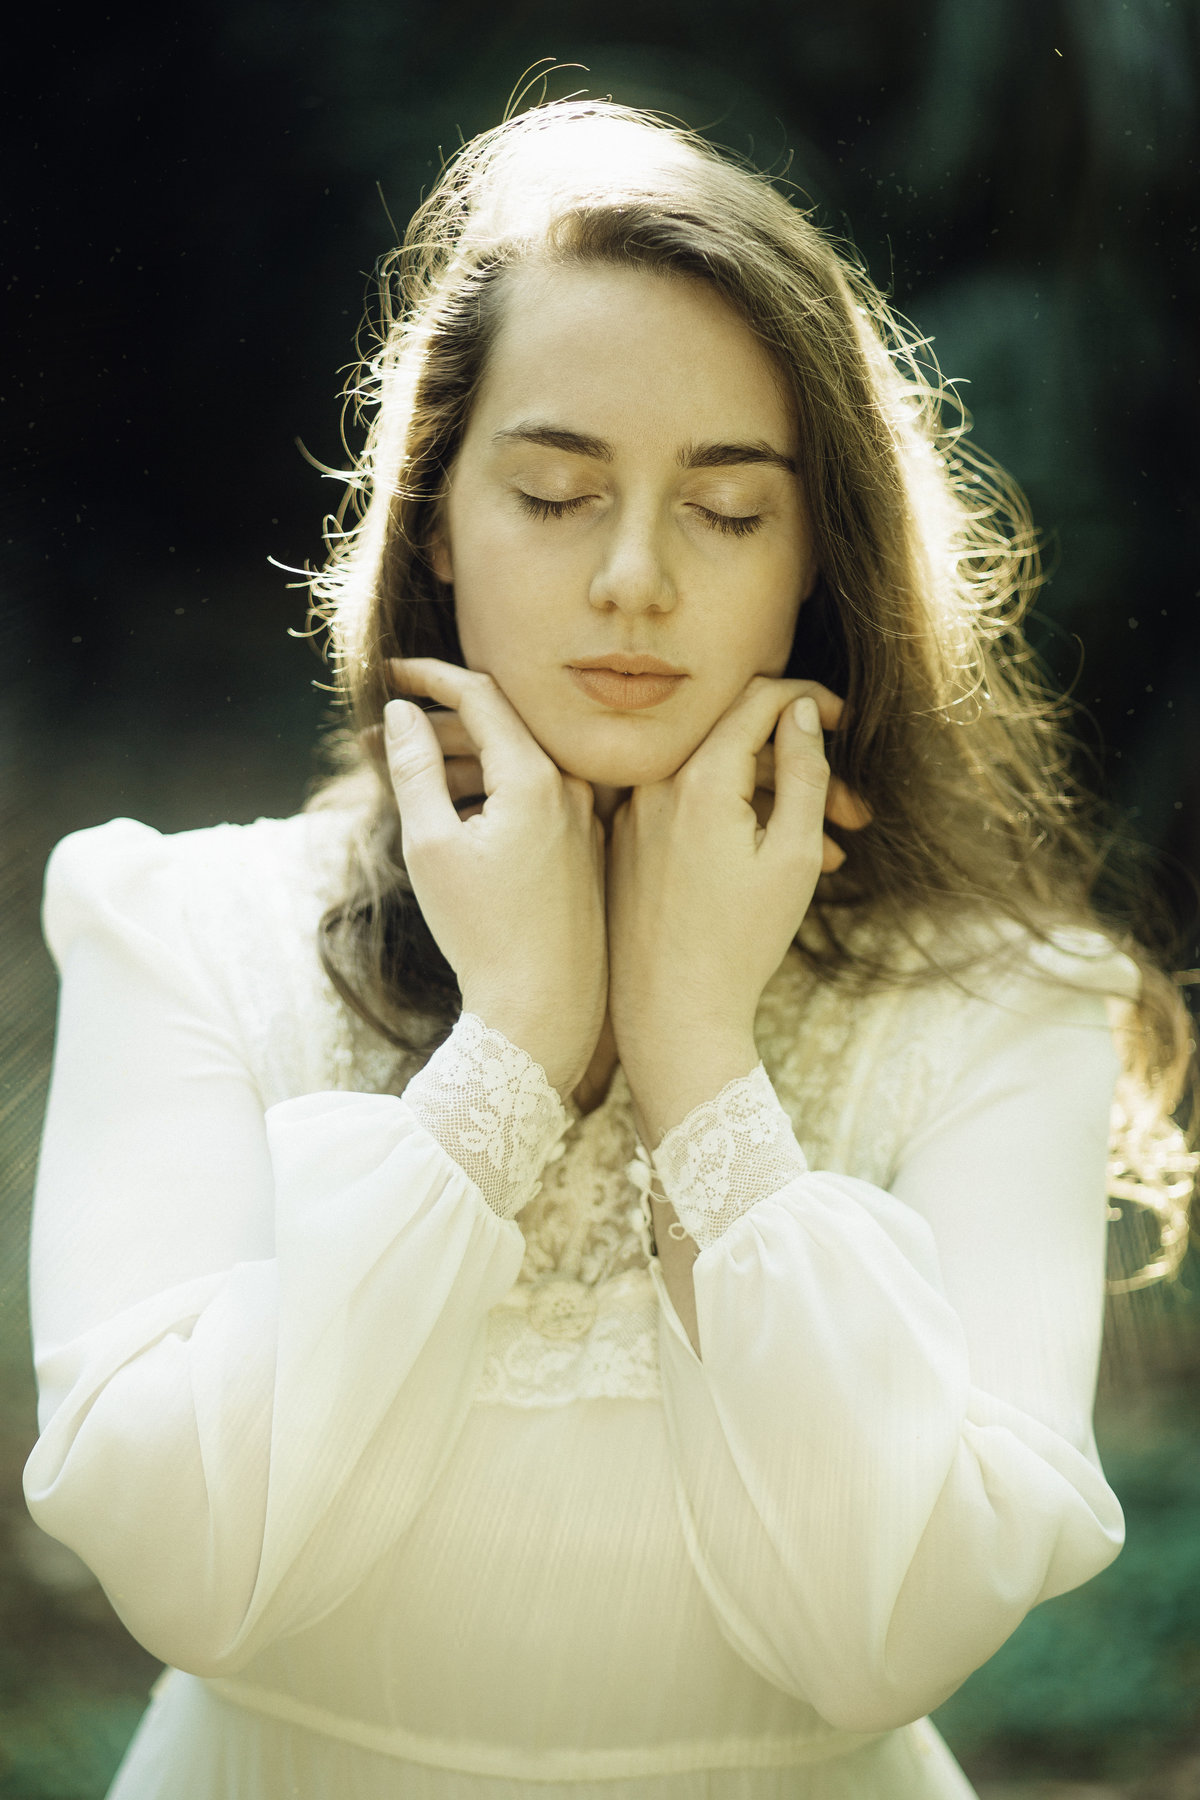 Portrait Photo Of Young Woman In White Dress With Her Eyes Closed Los Angeles